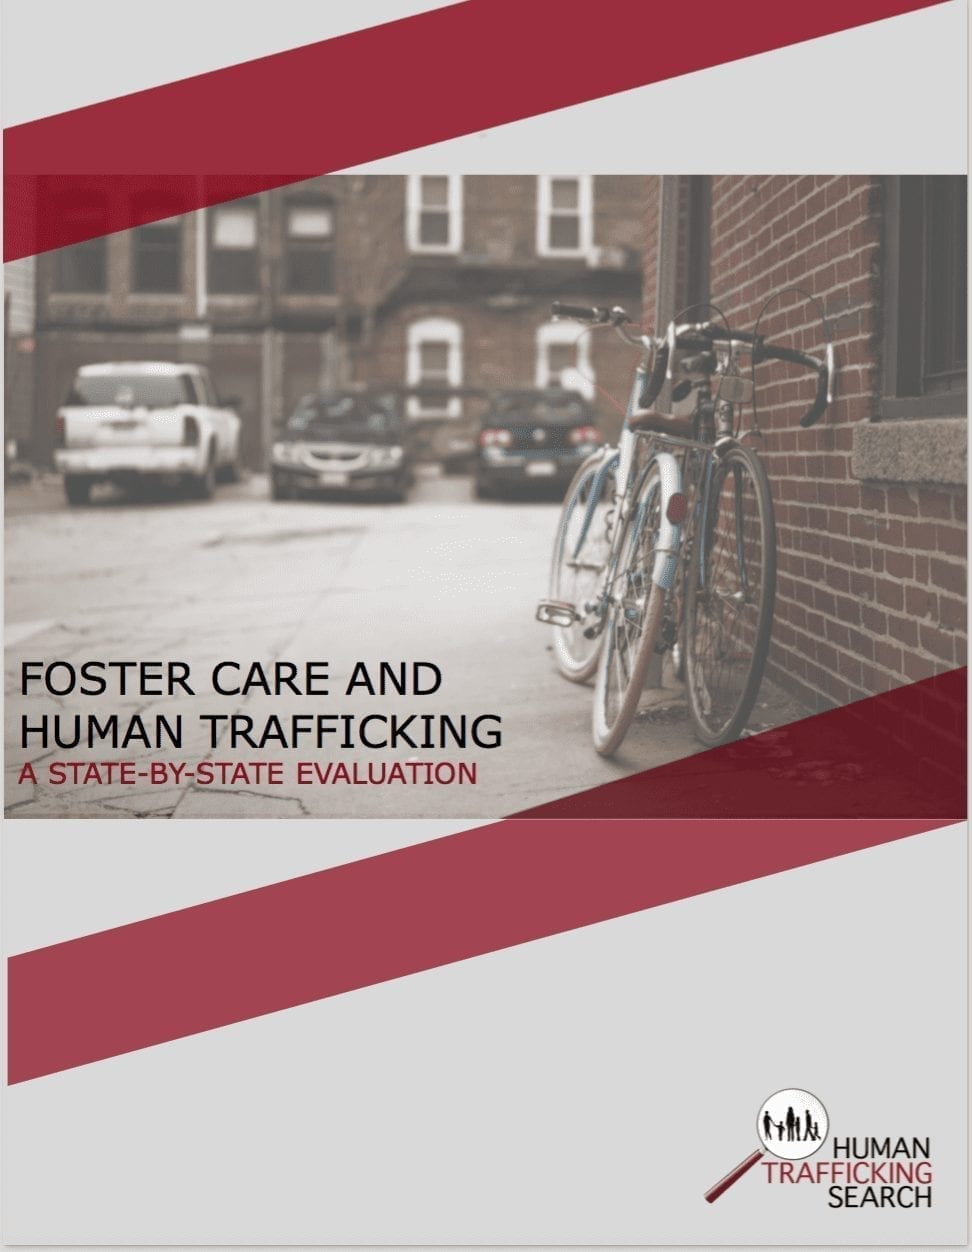 Part 4: Recommendations to Protect Foster Children from Trafficking